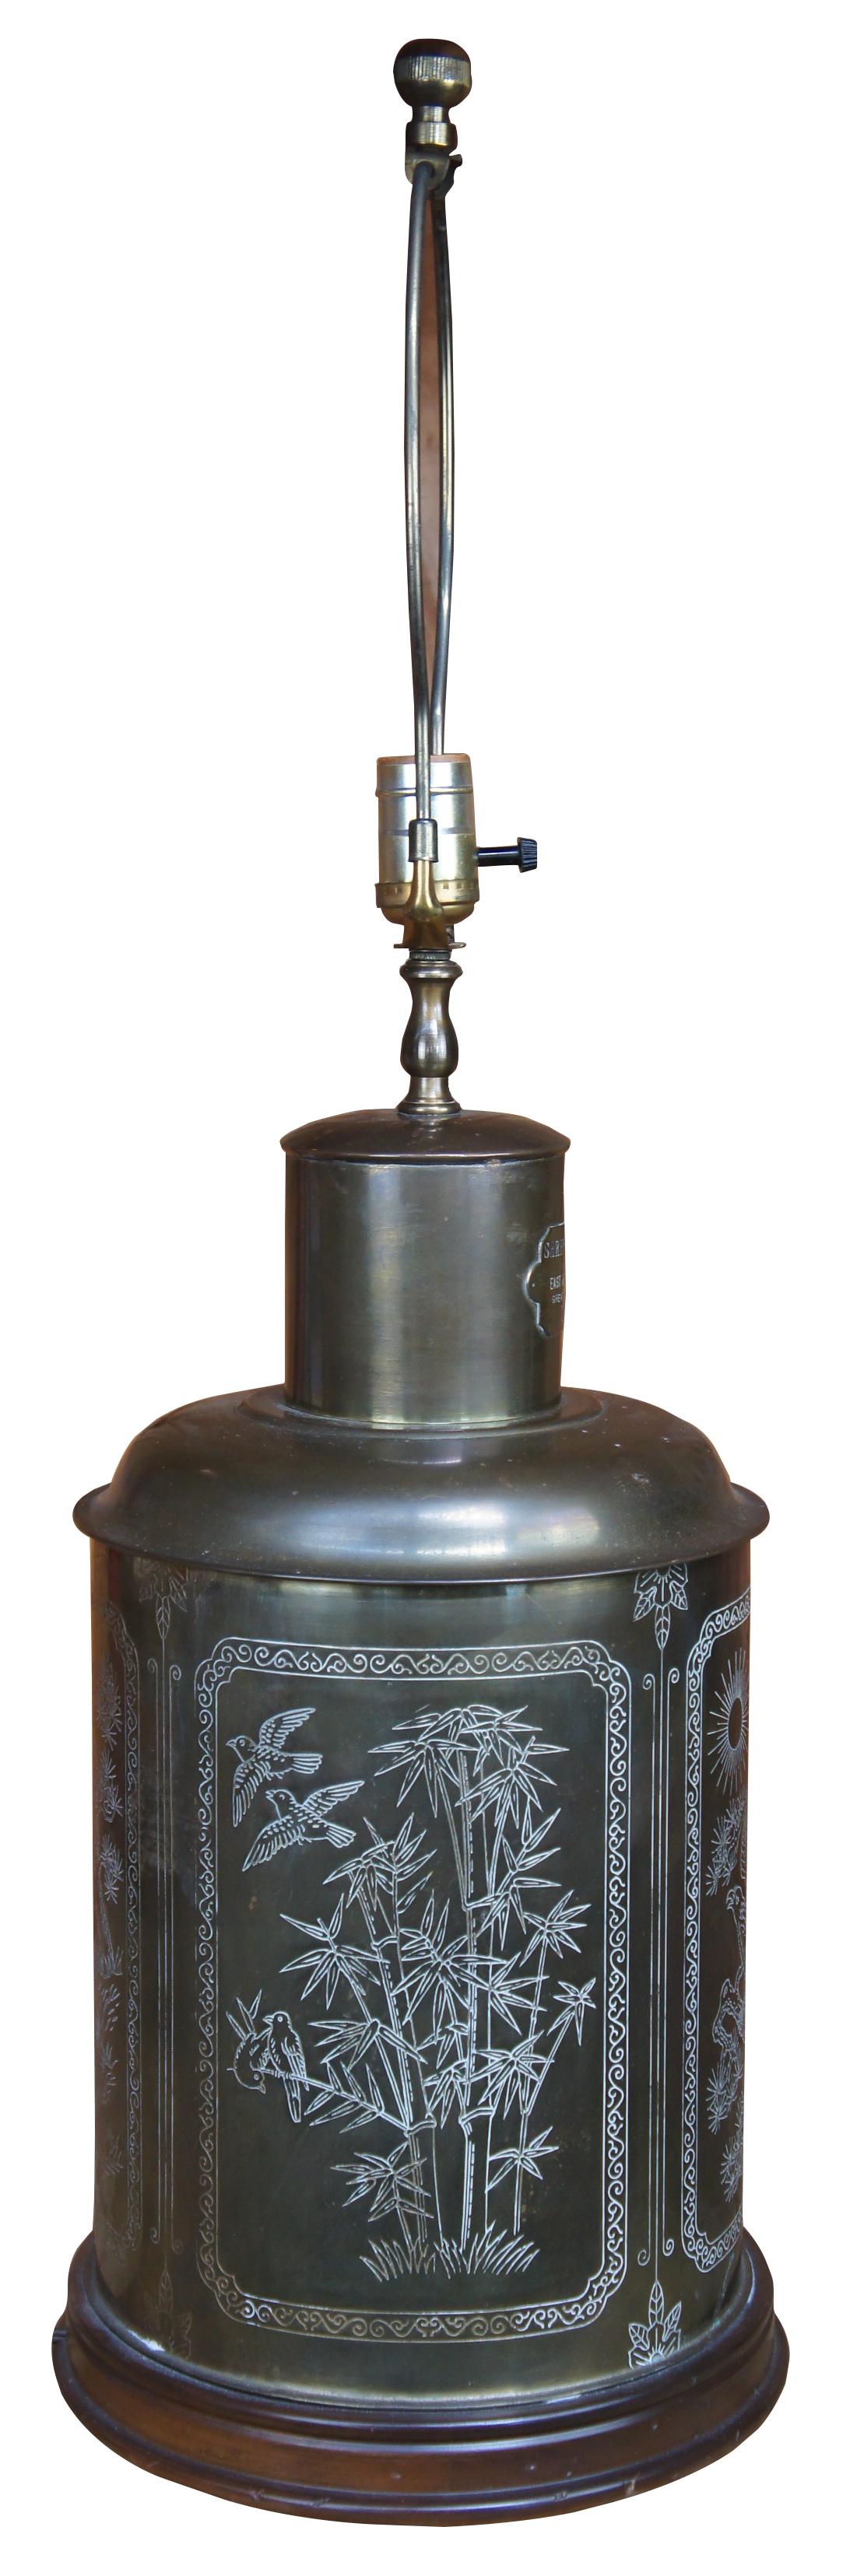 Antique Shrewsbury and Co Brass Chinoiserie Tea Caddy Cannister Table Lamp In Good Condition For Sale In Dayton, OH